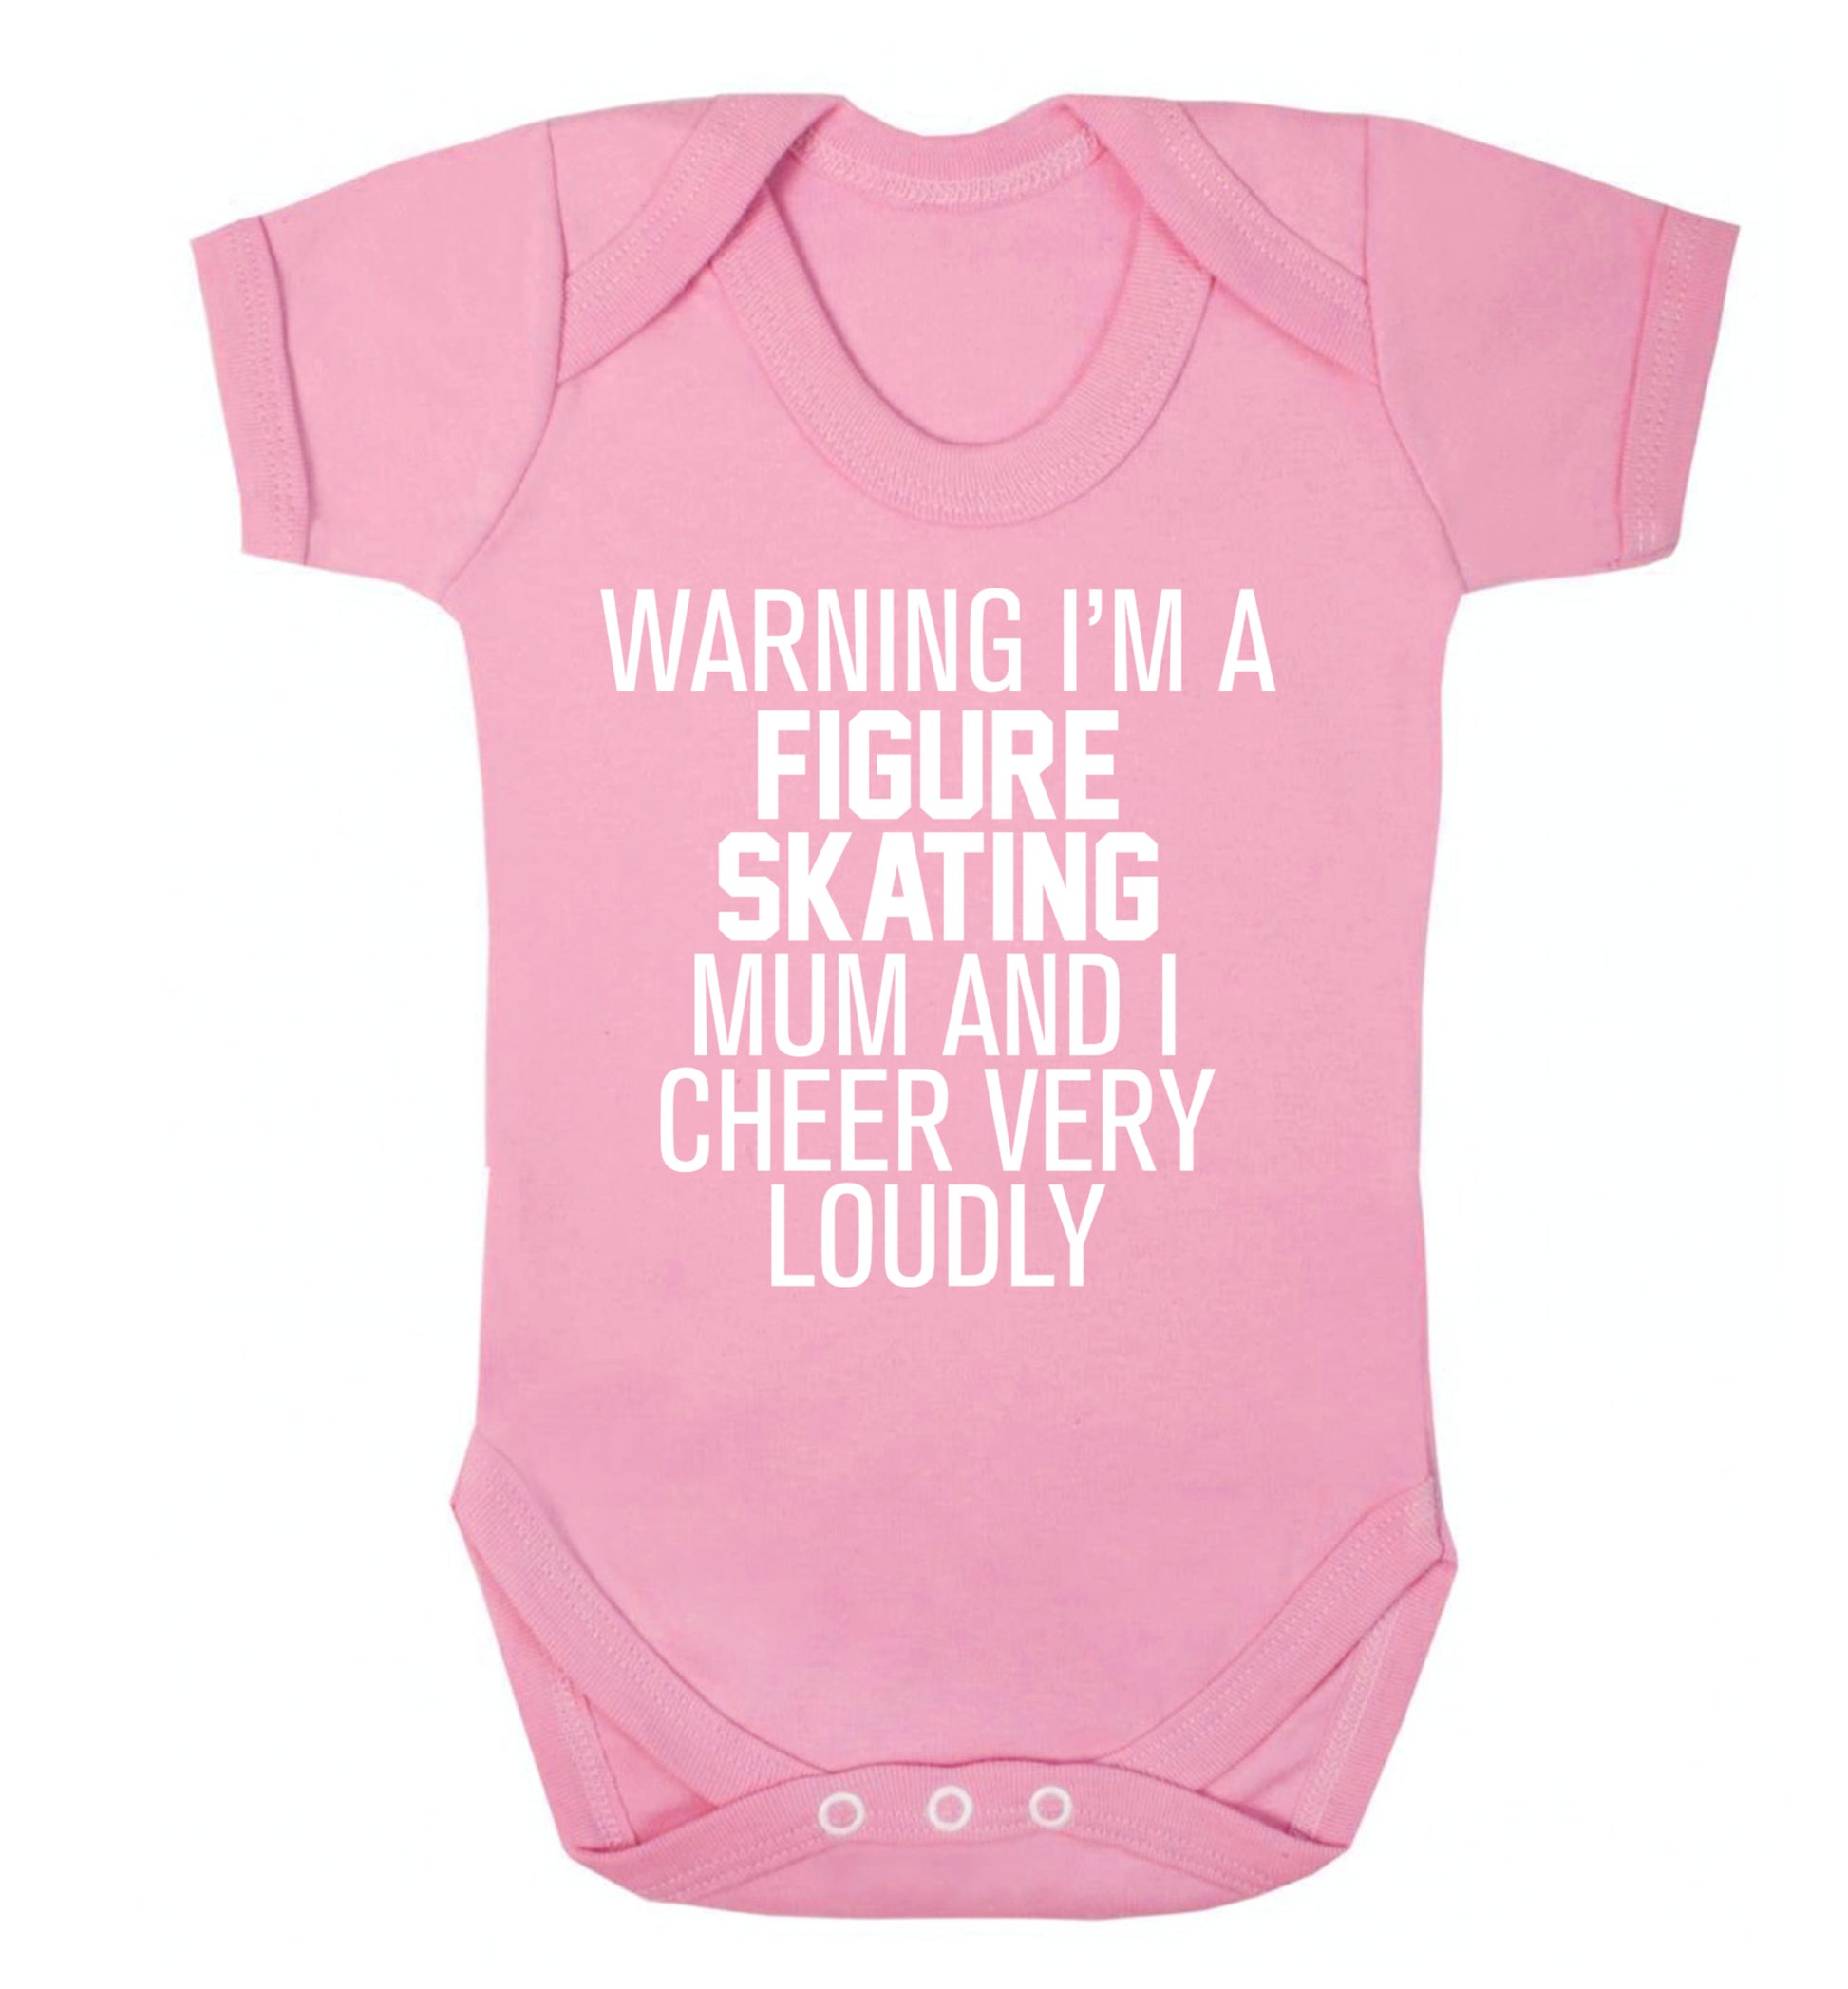 Warning I'm a figure skating mum and I cheer very loudly Baby Vest pale pink 18-24 months